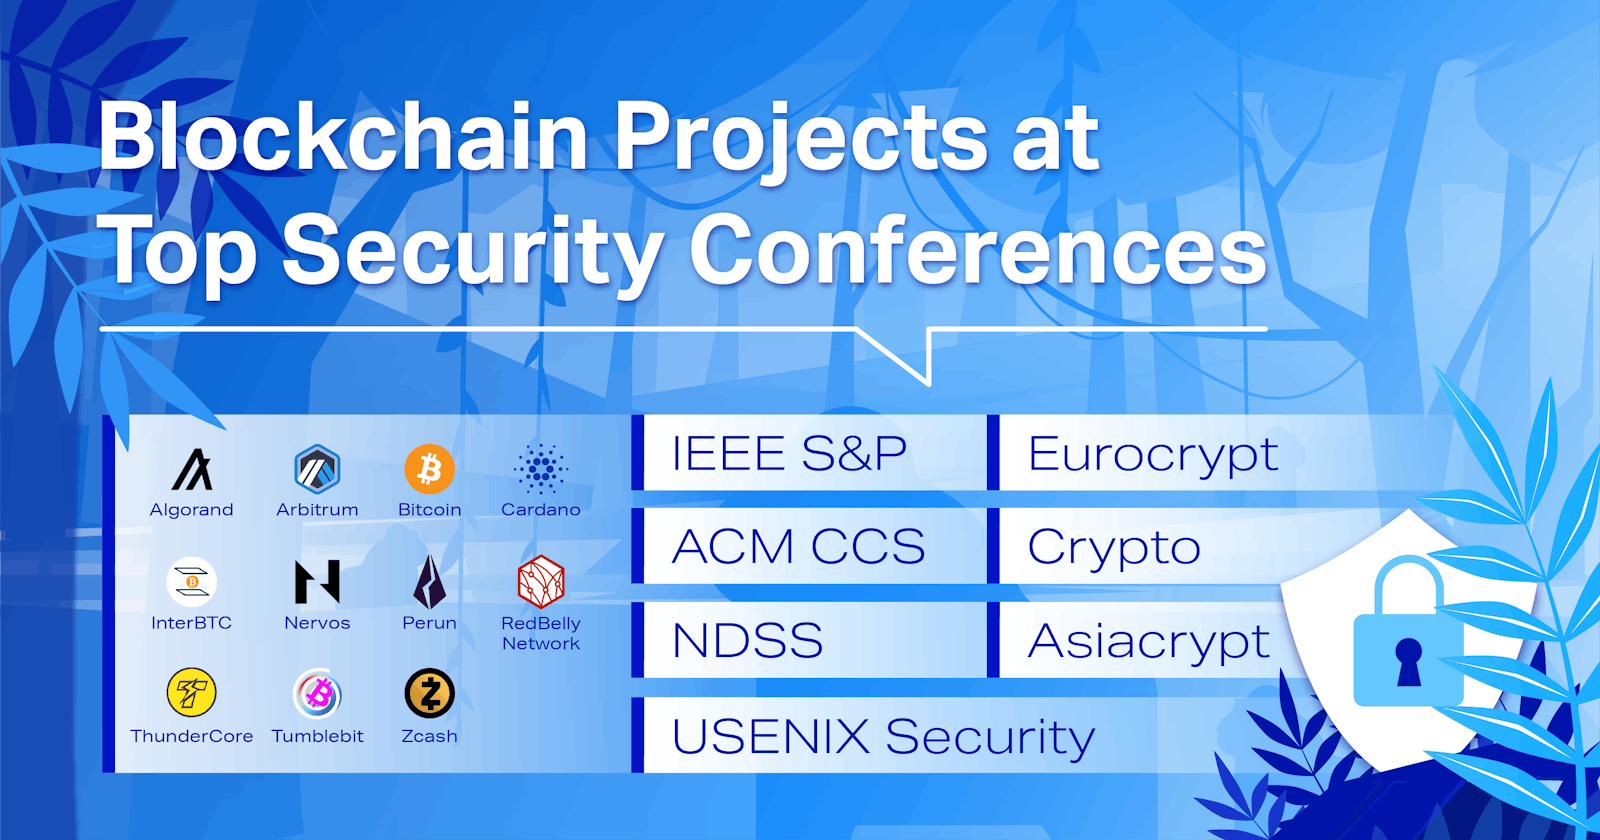 Blockchain Projects at Top Security Conferences